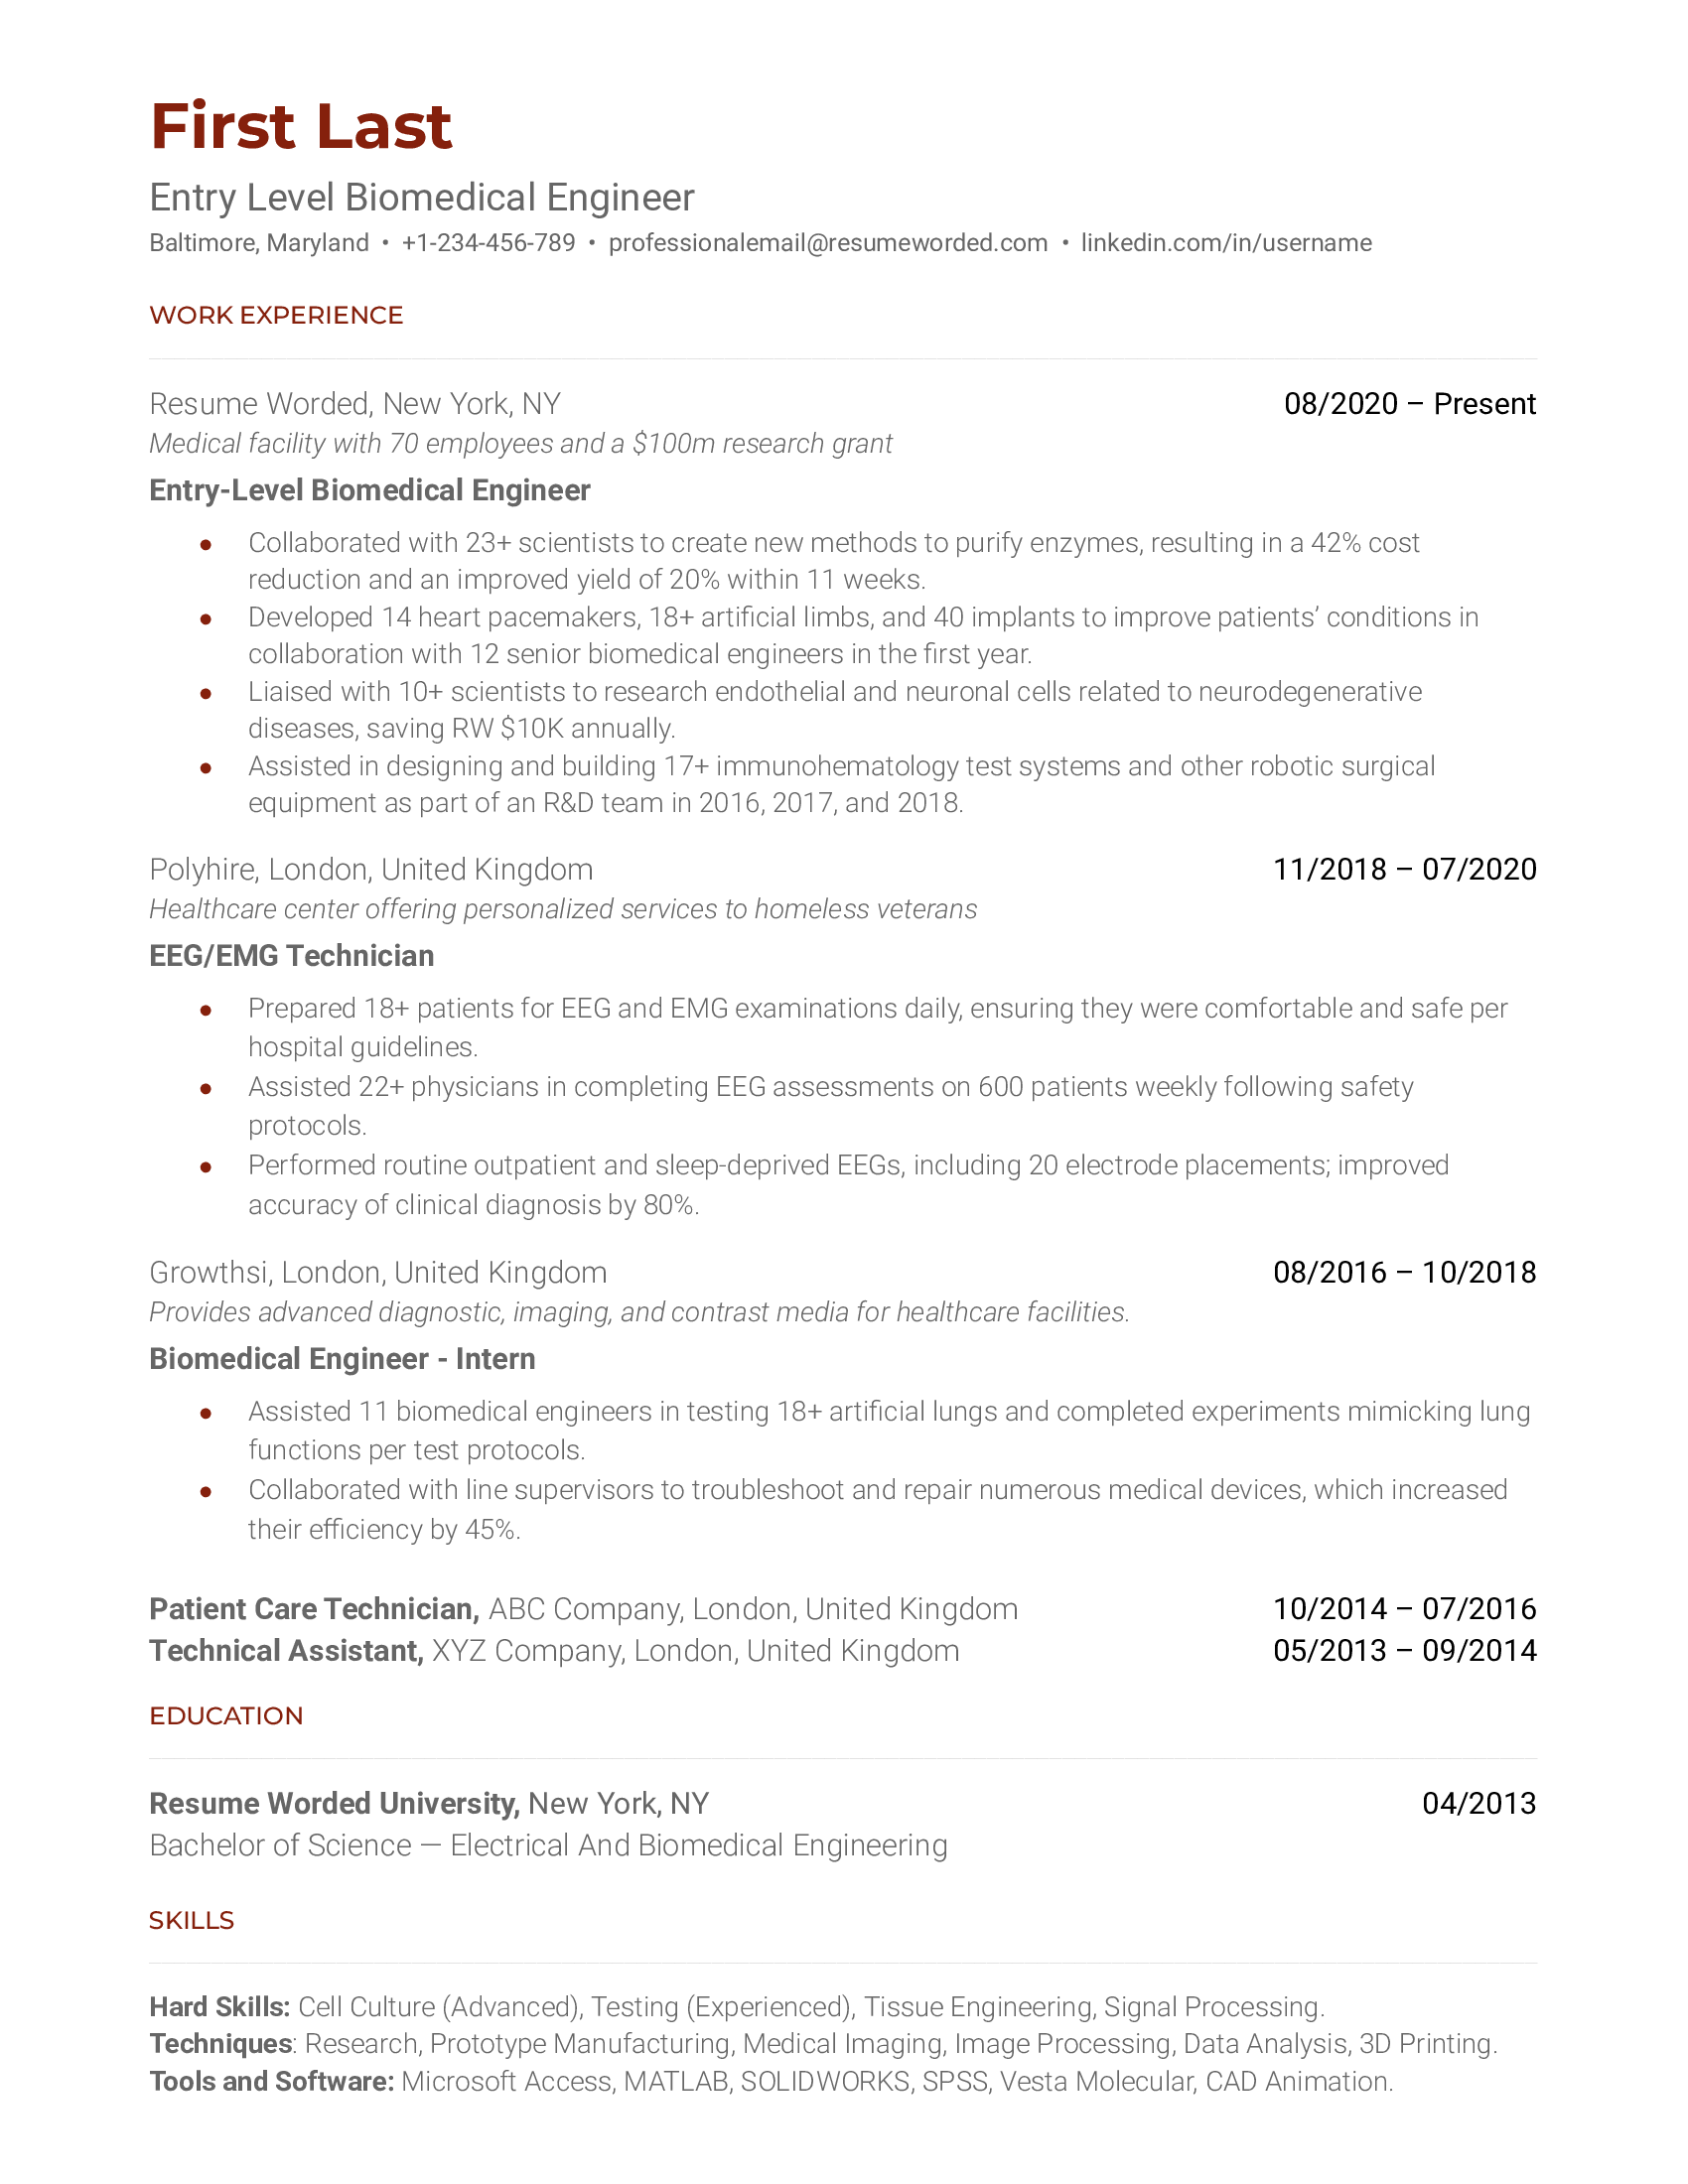 A well-organized CV for an entry-level biomedical engineer role.